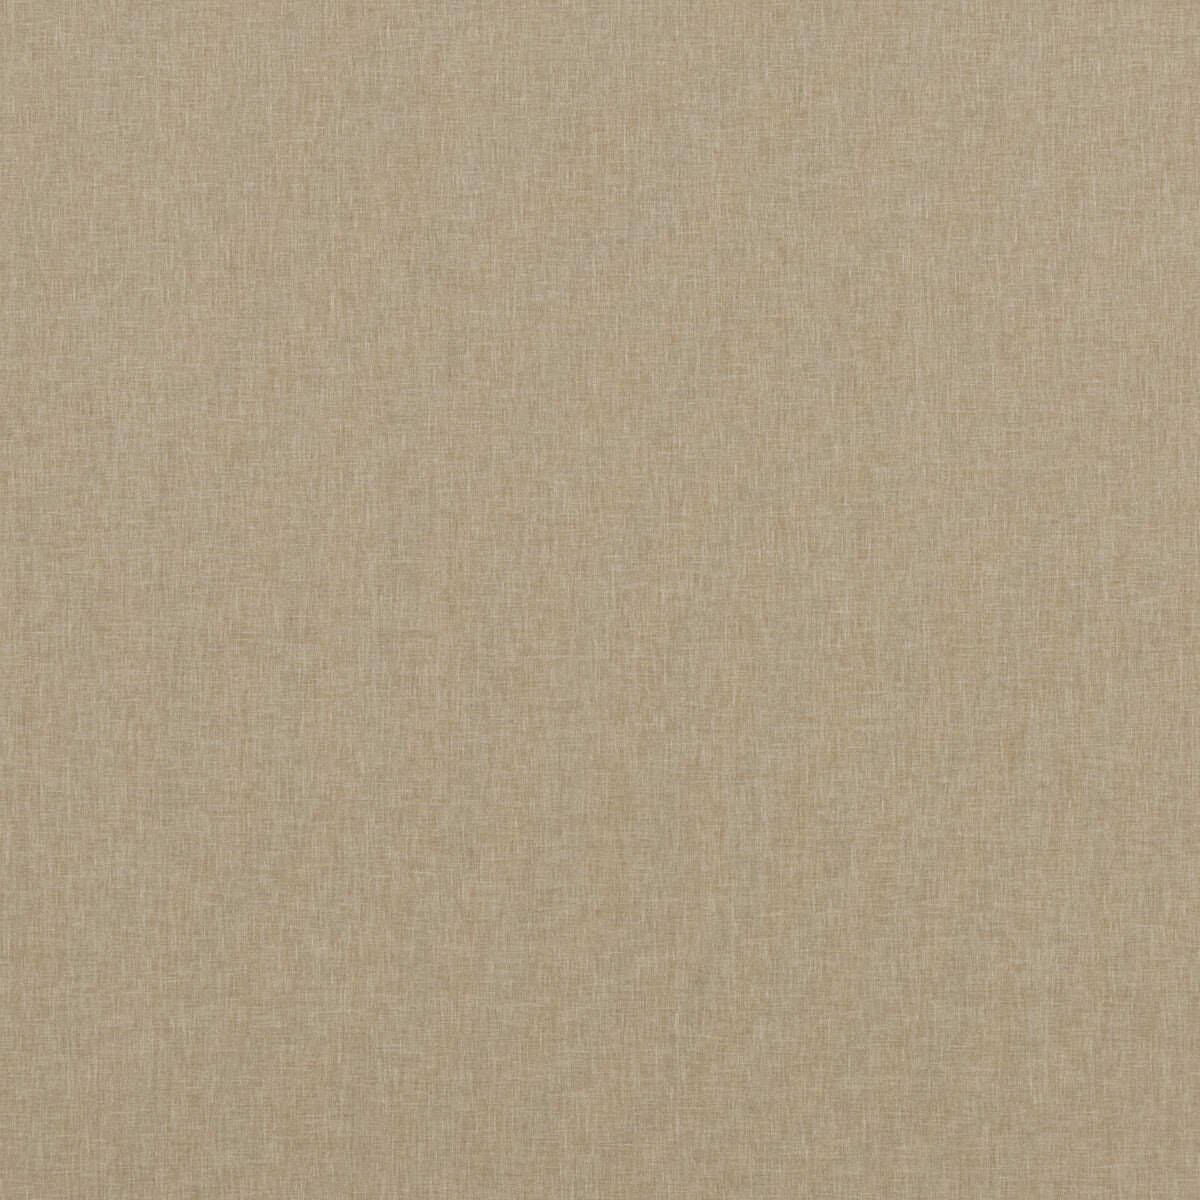 Carnival Plain fabric in hemp color - pattern PF50420.180.0 - by Baker Lifestyle in the Carnival collection